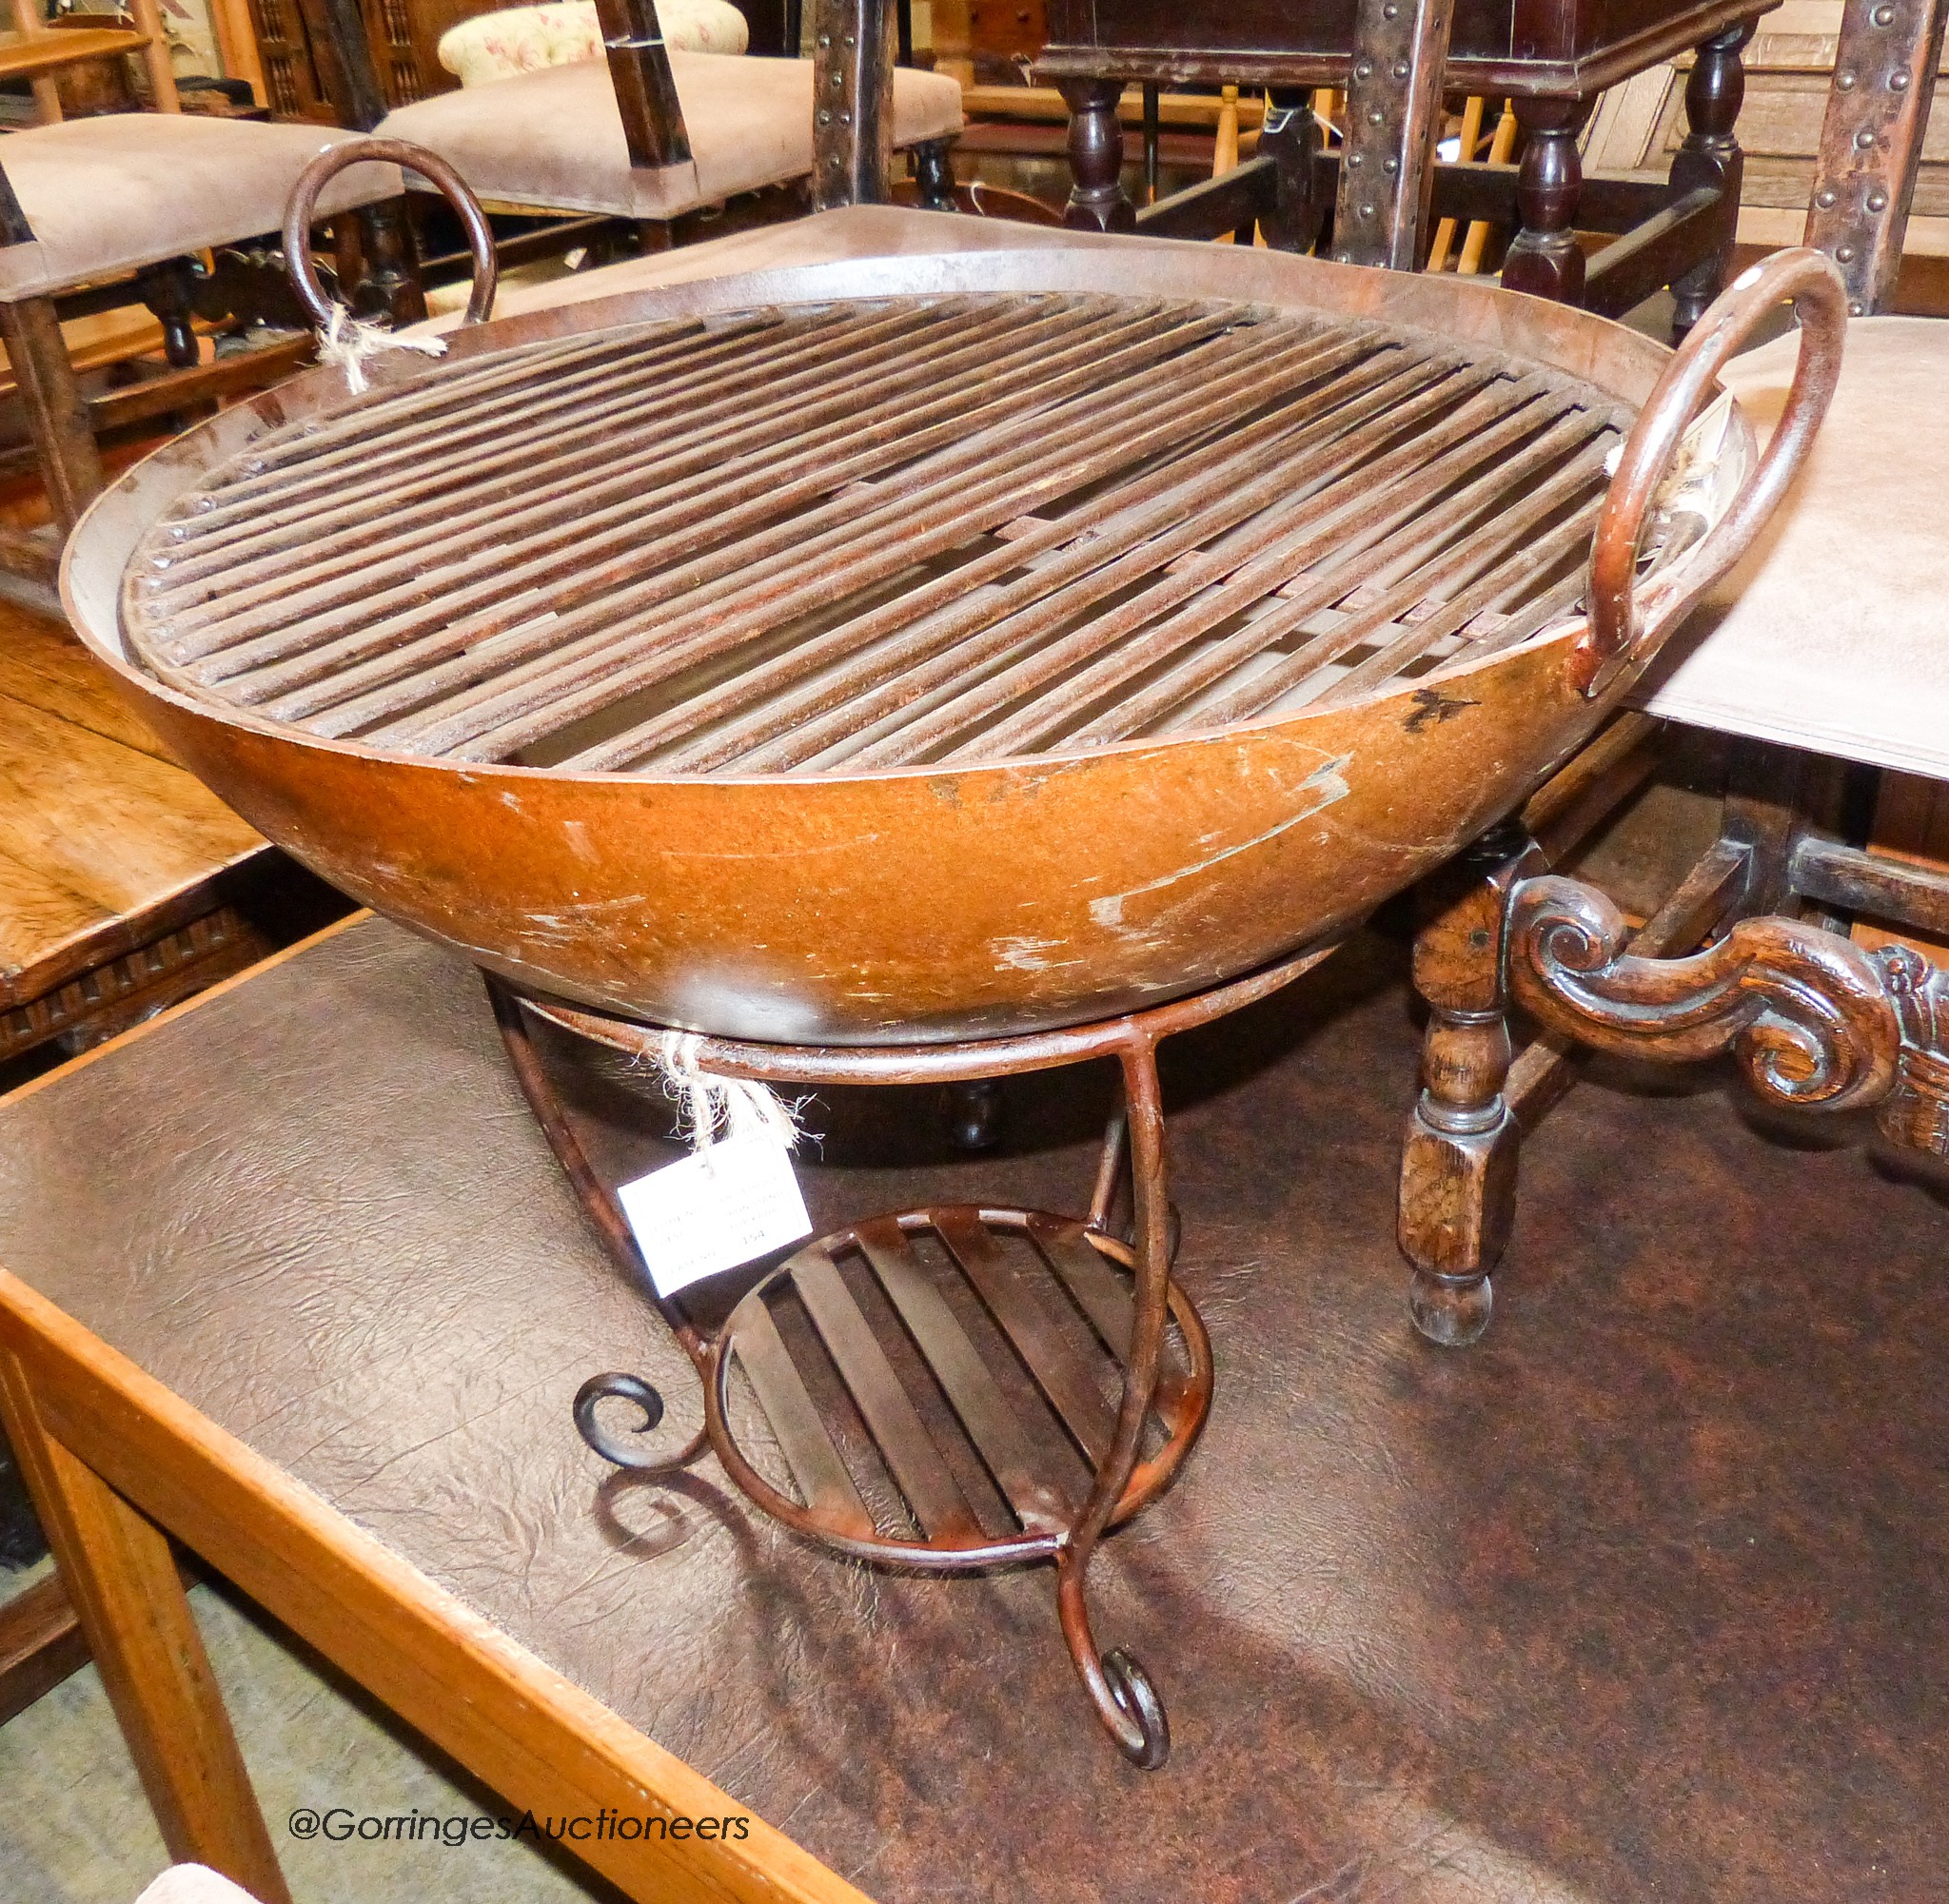 A cast iron fire pit with grill, diameter 67cm, height 65cm                                                                                                                                                                 